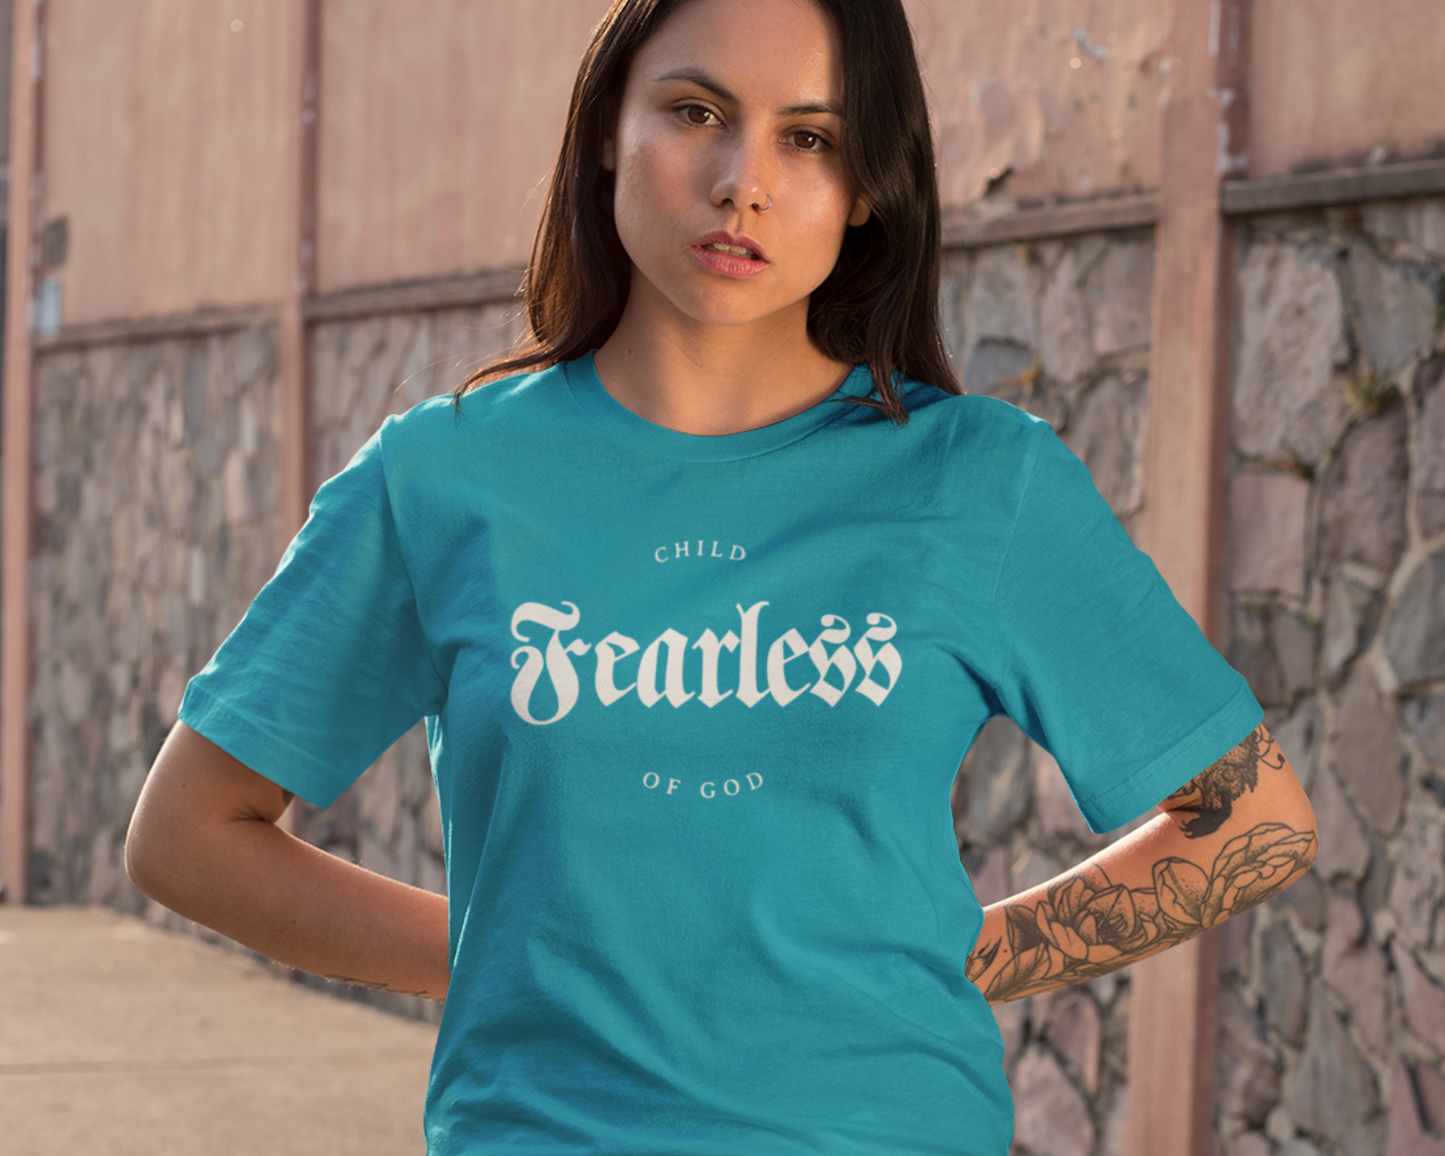 Fearless child of God woman's T-Shirt